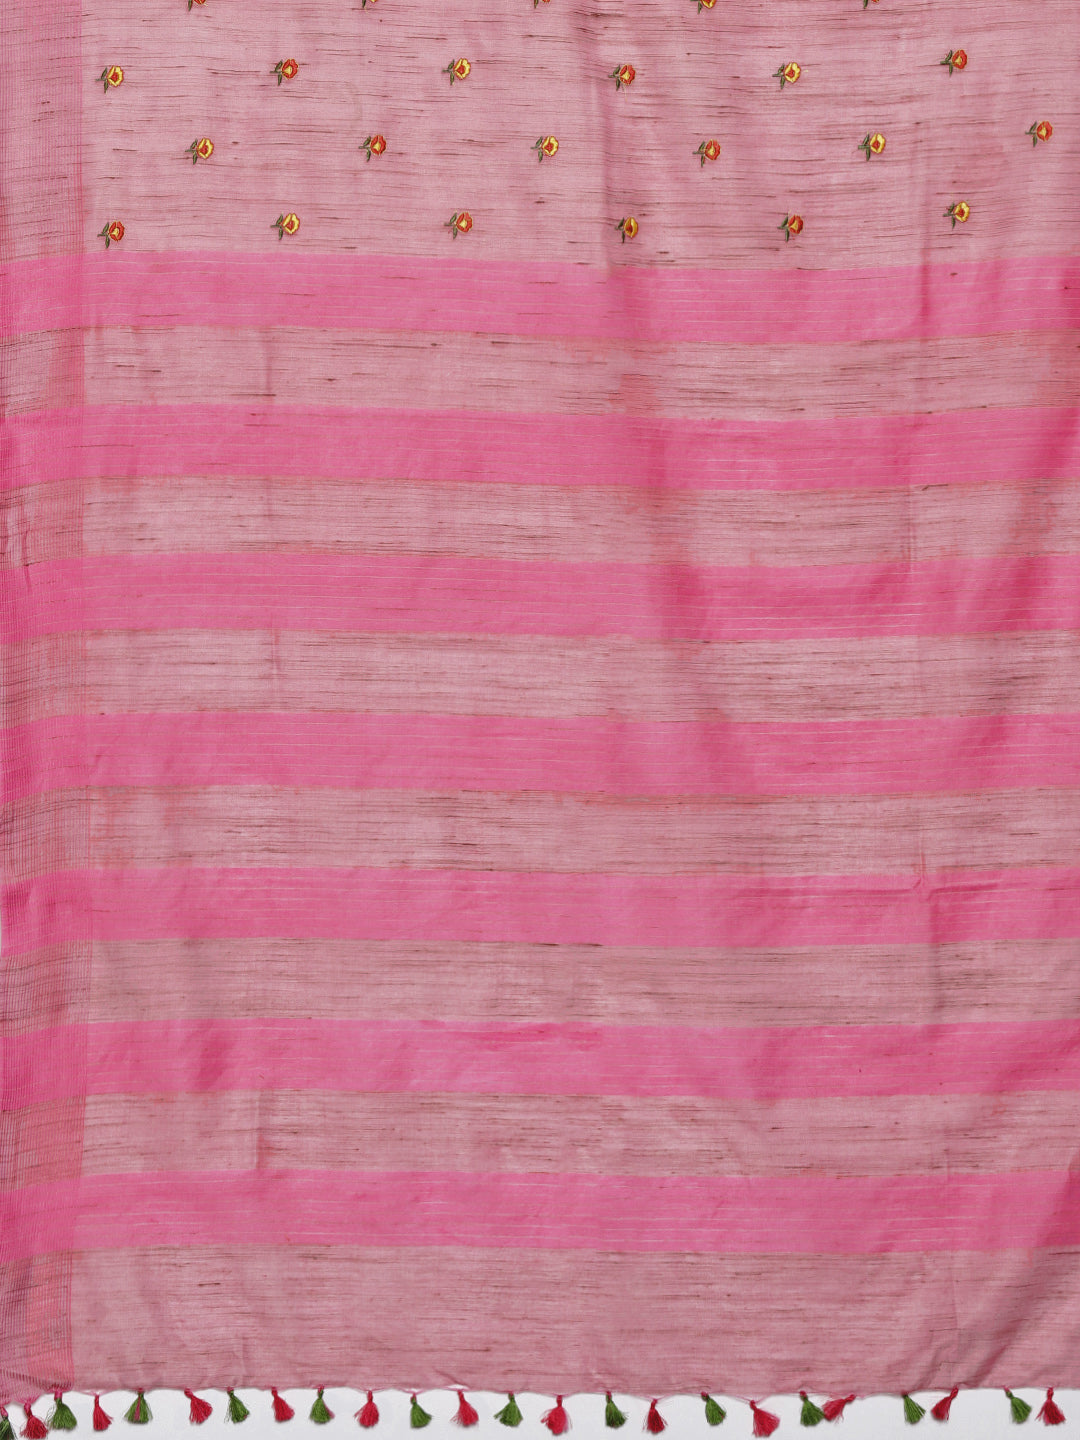 Kalakari India Kota Silk Embroidered Saree With Blouse ALBGSA0171-Saree-Kalakari India-ALBGSA0171-Geographical Indication, Hand Crafted, Heritage Prints, Linen, Natural Dyes, Pure Cotton, Sarees, Sustainable Fabrics, Woven-[Linen,Ethnic,wear,Fashionista,Handloom,Handicraft,Indigo,blockprint,block,print,Cotton,Chanderi,Blue, latest,classy,party,bollywood,trendy,summer,style,traditional,formal,elegant,unique,style,hand,block,print, dabu,booti,gift,present,glamorous,affordable,collectible,Sari,Sare